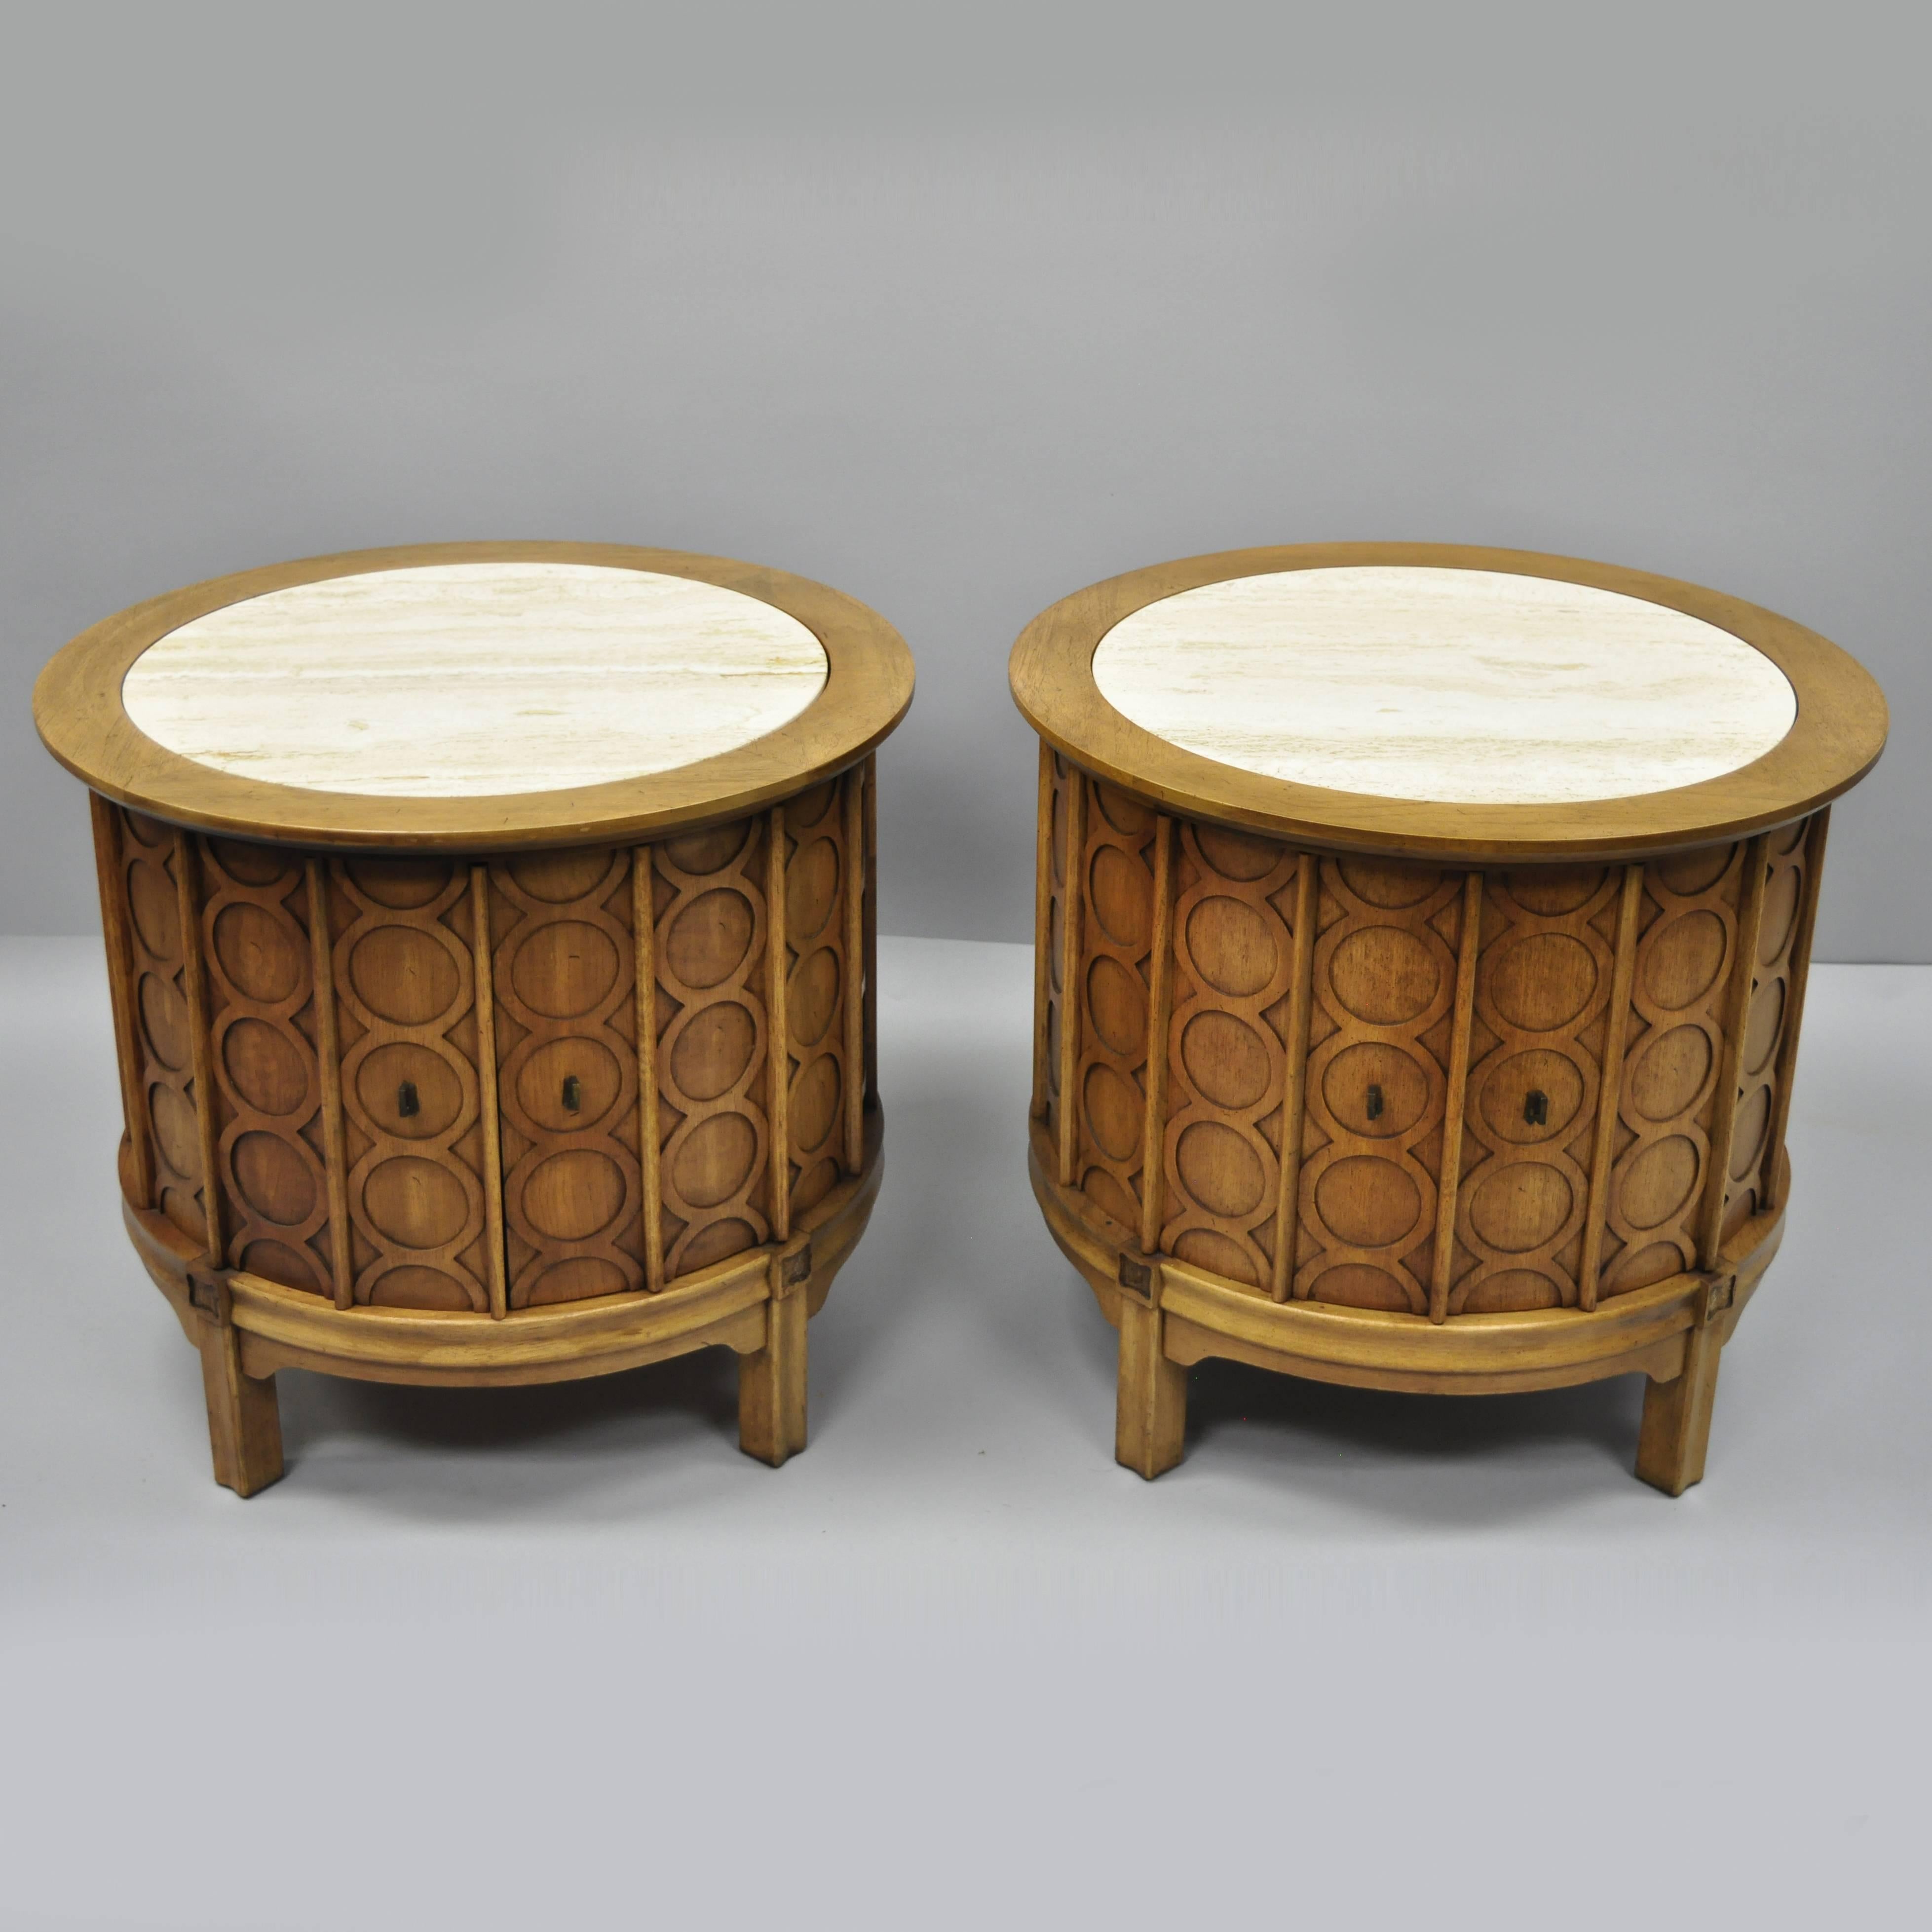 Pair of Thomasville Travertine Top Mid-Century Modern Round Commode End Tables 4